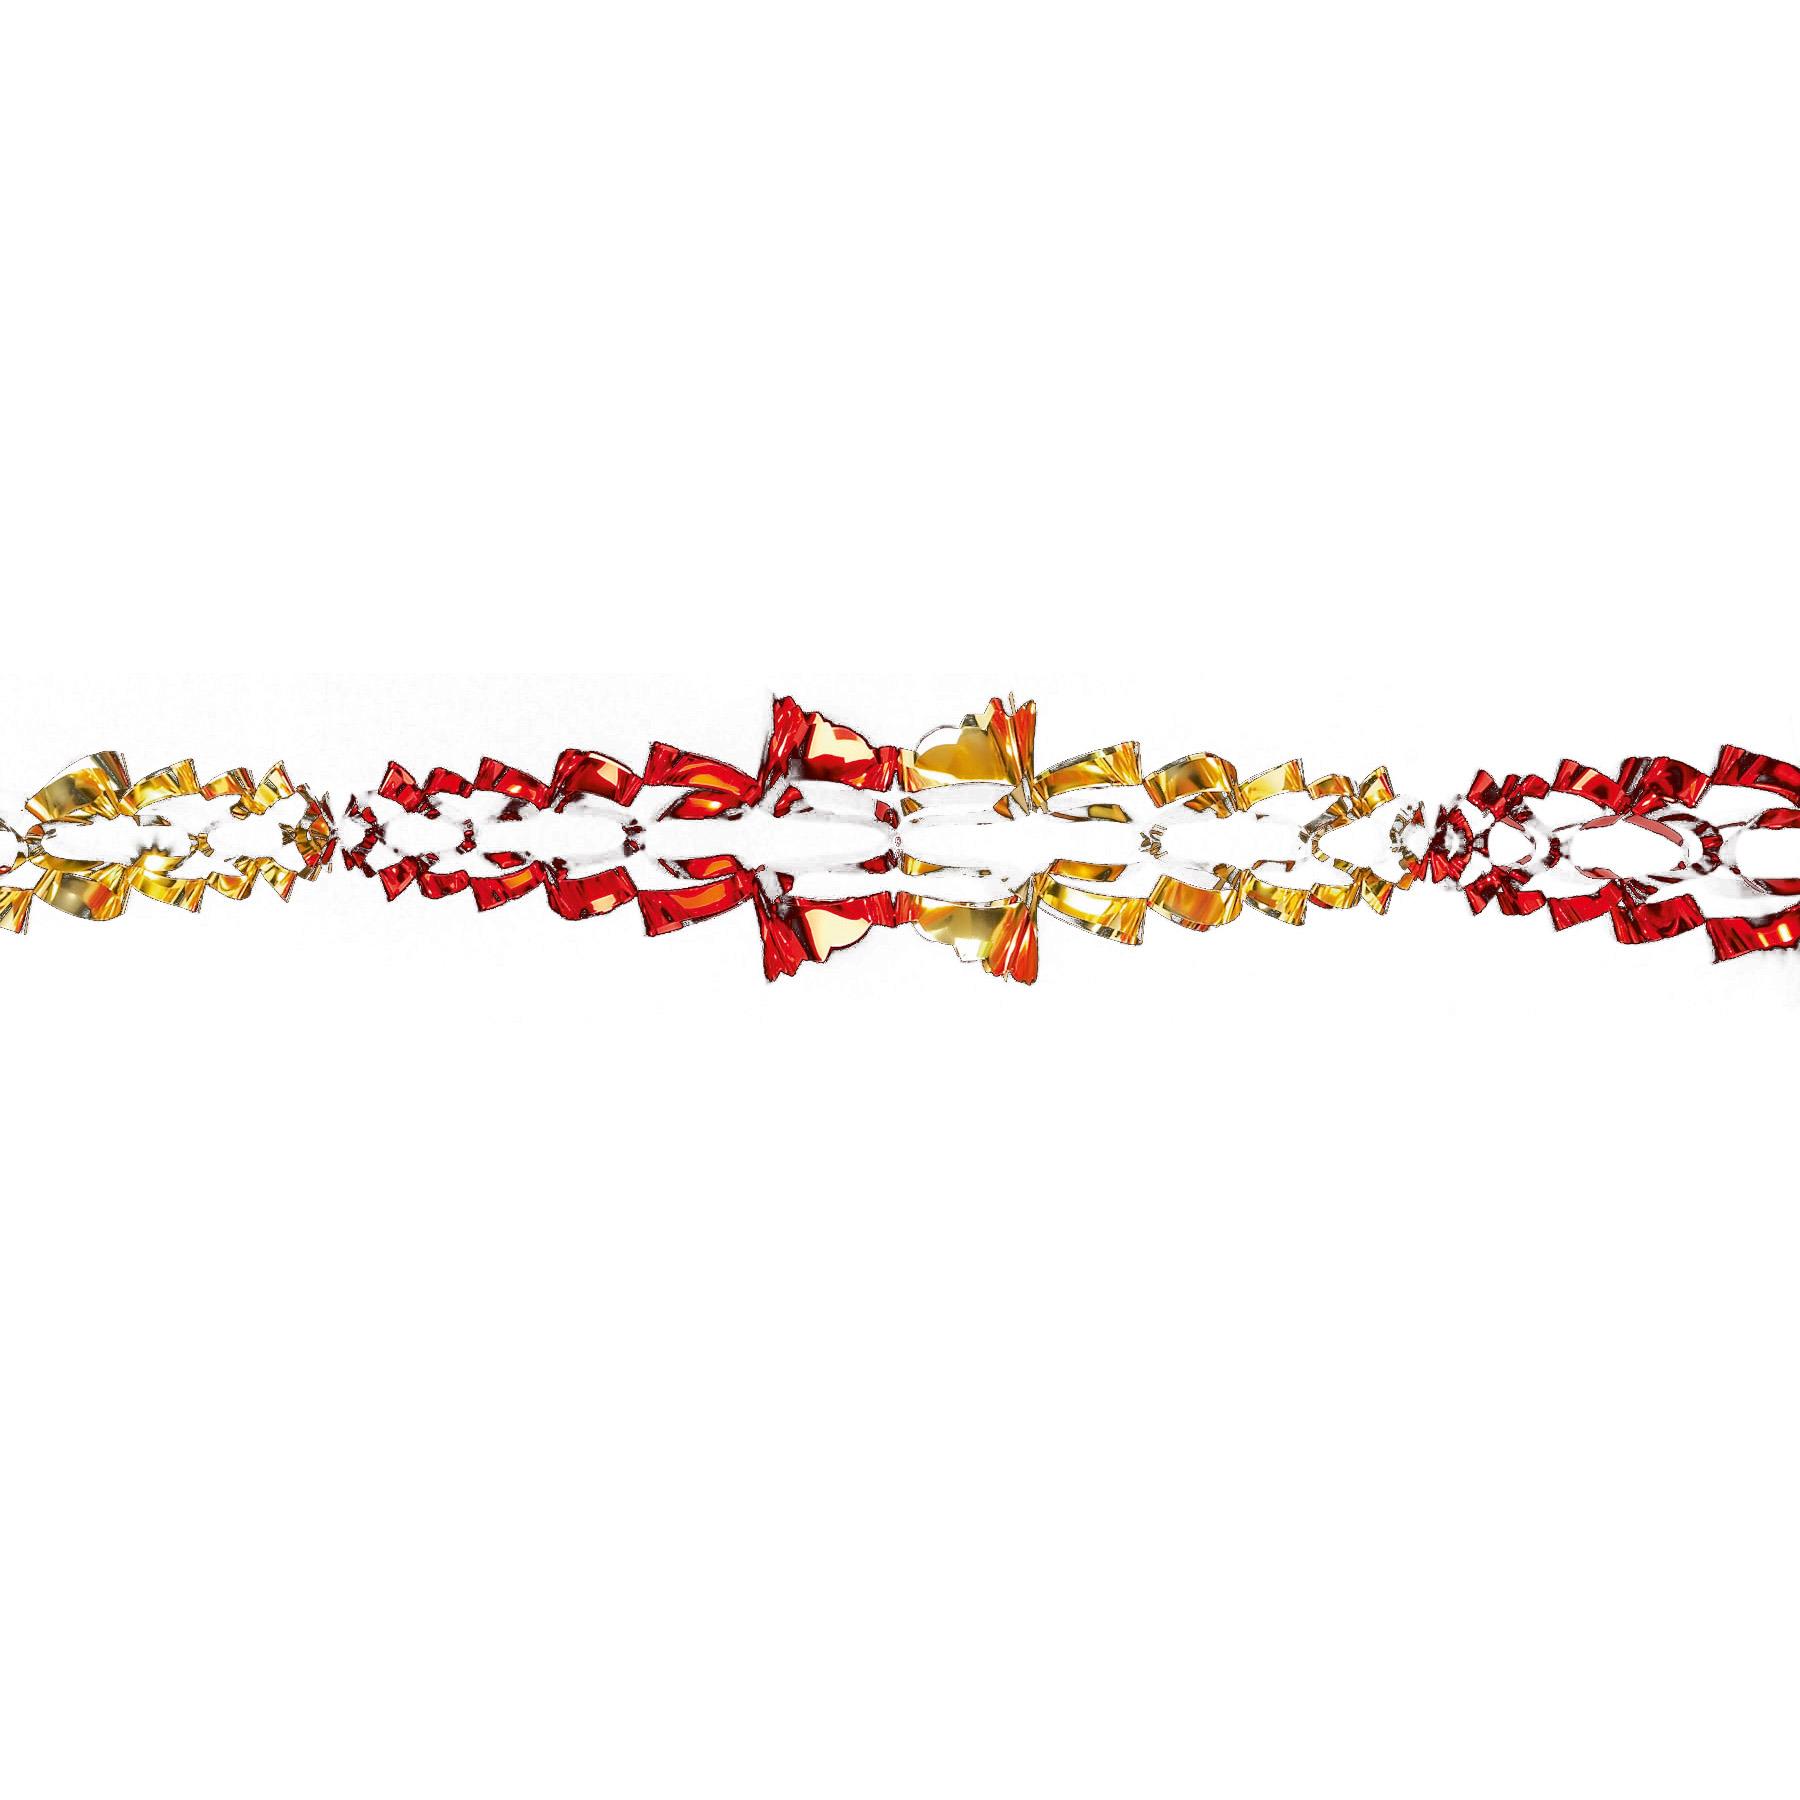 Red / Gold Christmas 2 Tone Foil Ceiling Decorations - 15cm x 2.7M Garland